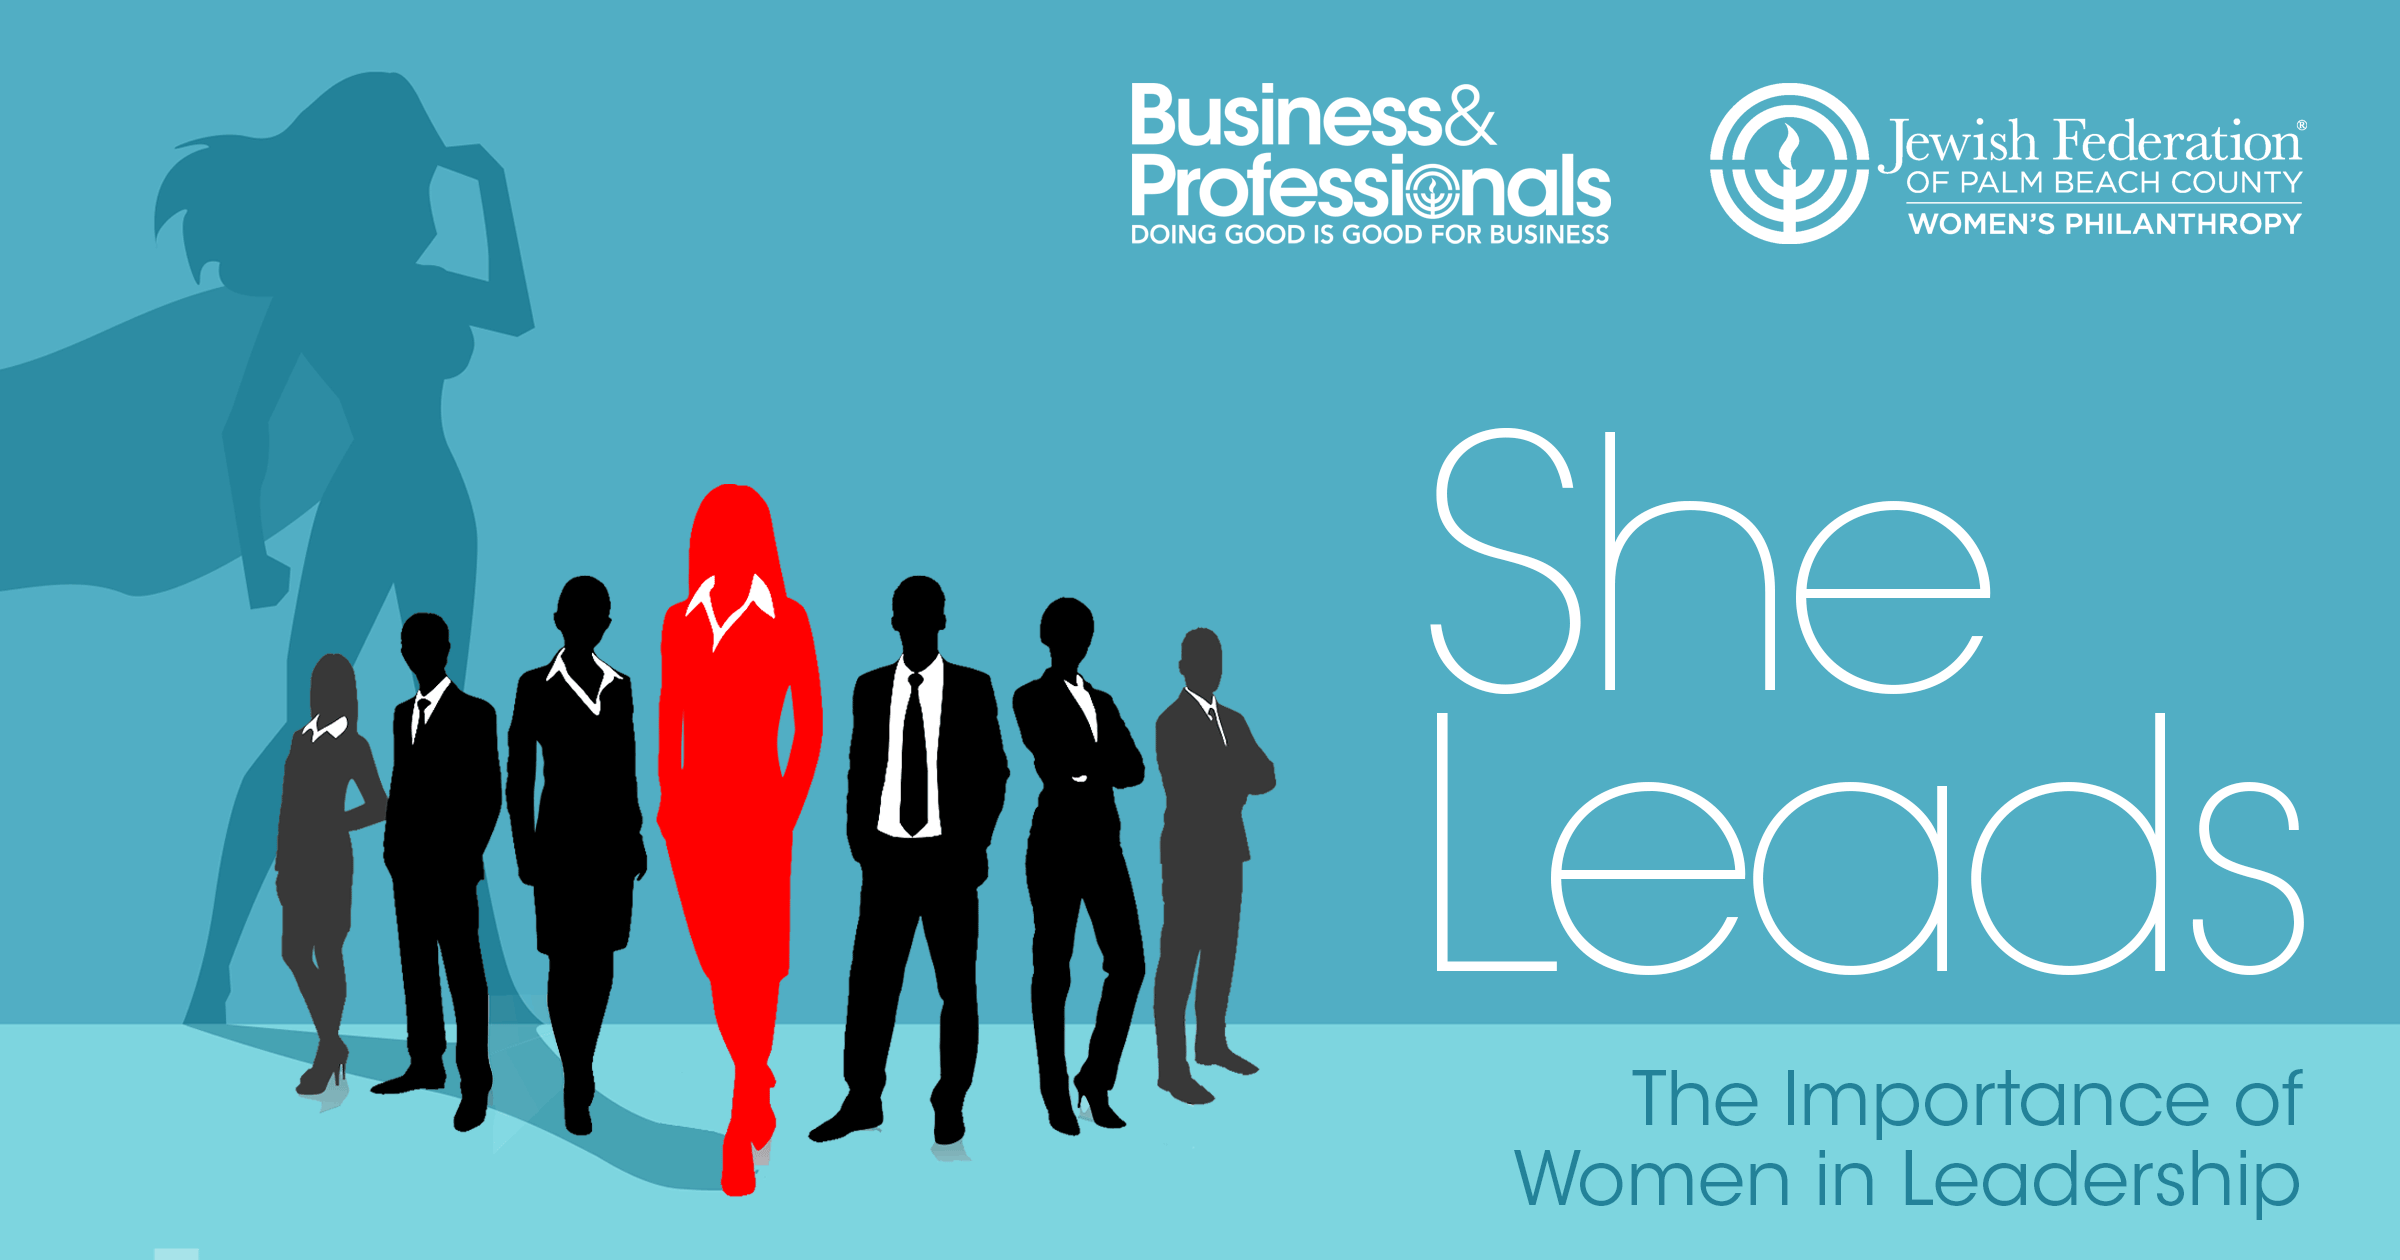 She Leads: The Importance of Women in Leadership